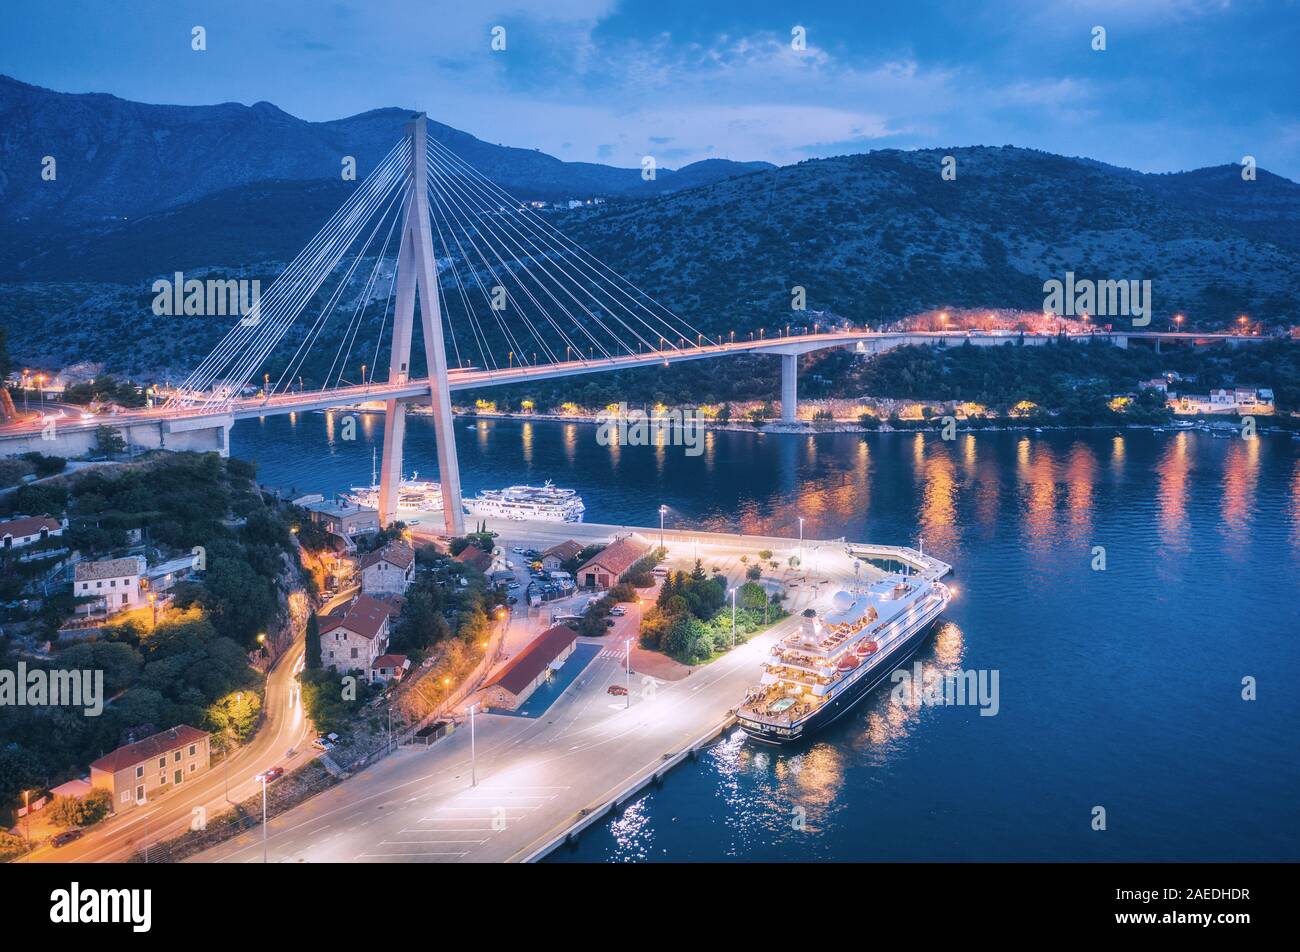 Aerial view of cruise ship in port and beautiful bridge at night Stock Photo